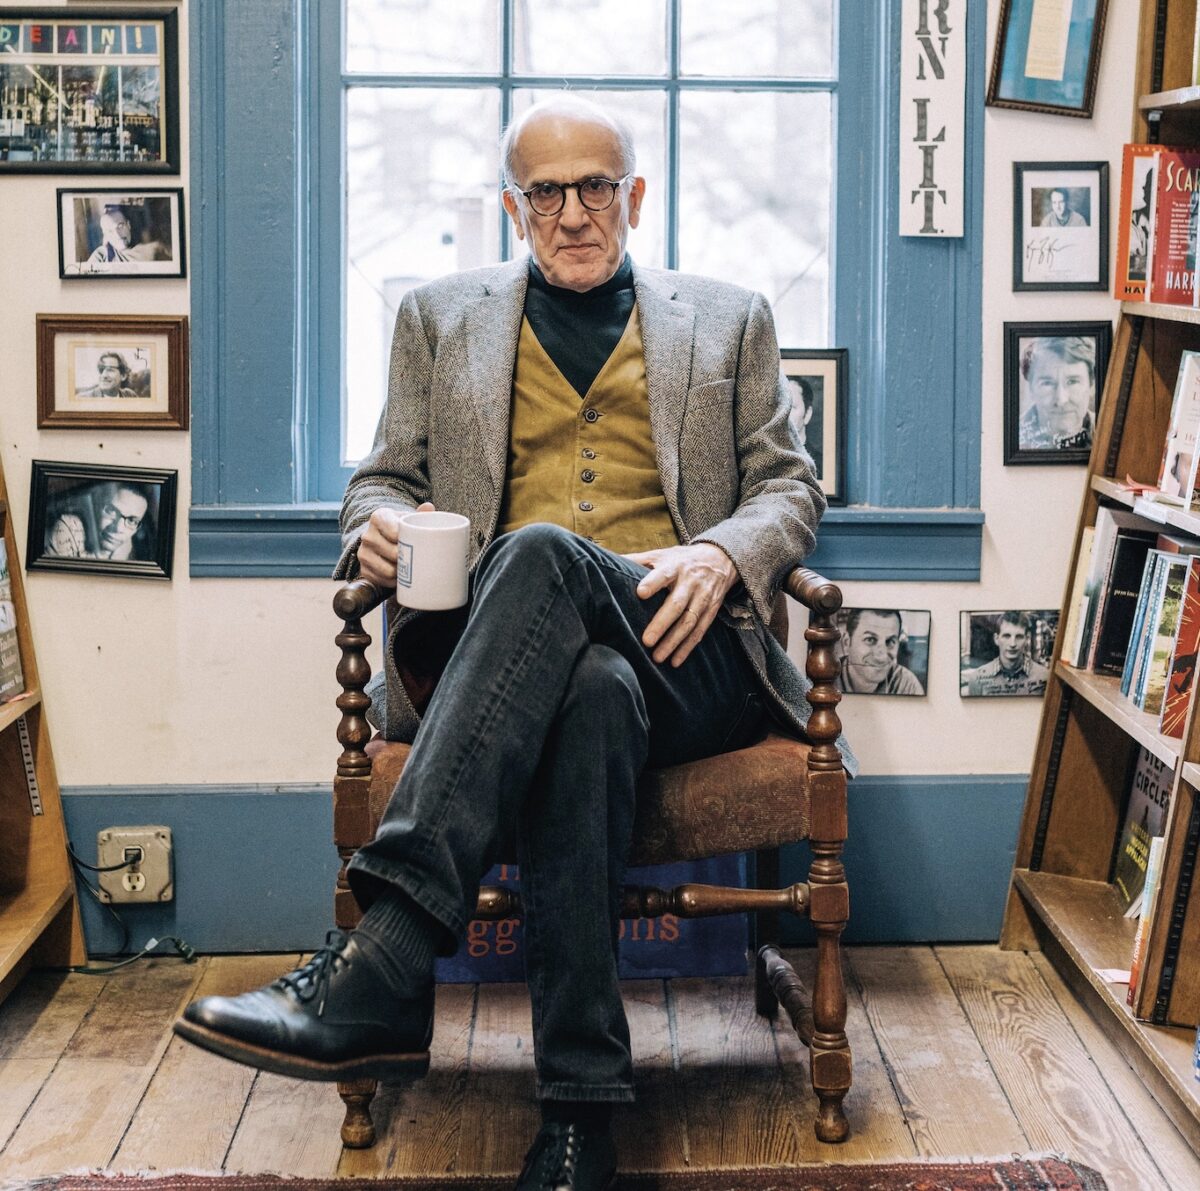 Since childhood,
Richard Howorth
wanted to open
a bookstore in
his hometown of
Oxford, Miss. (White Studio Creative)